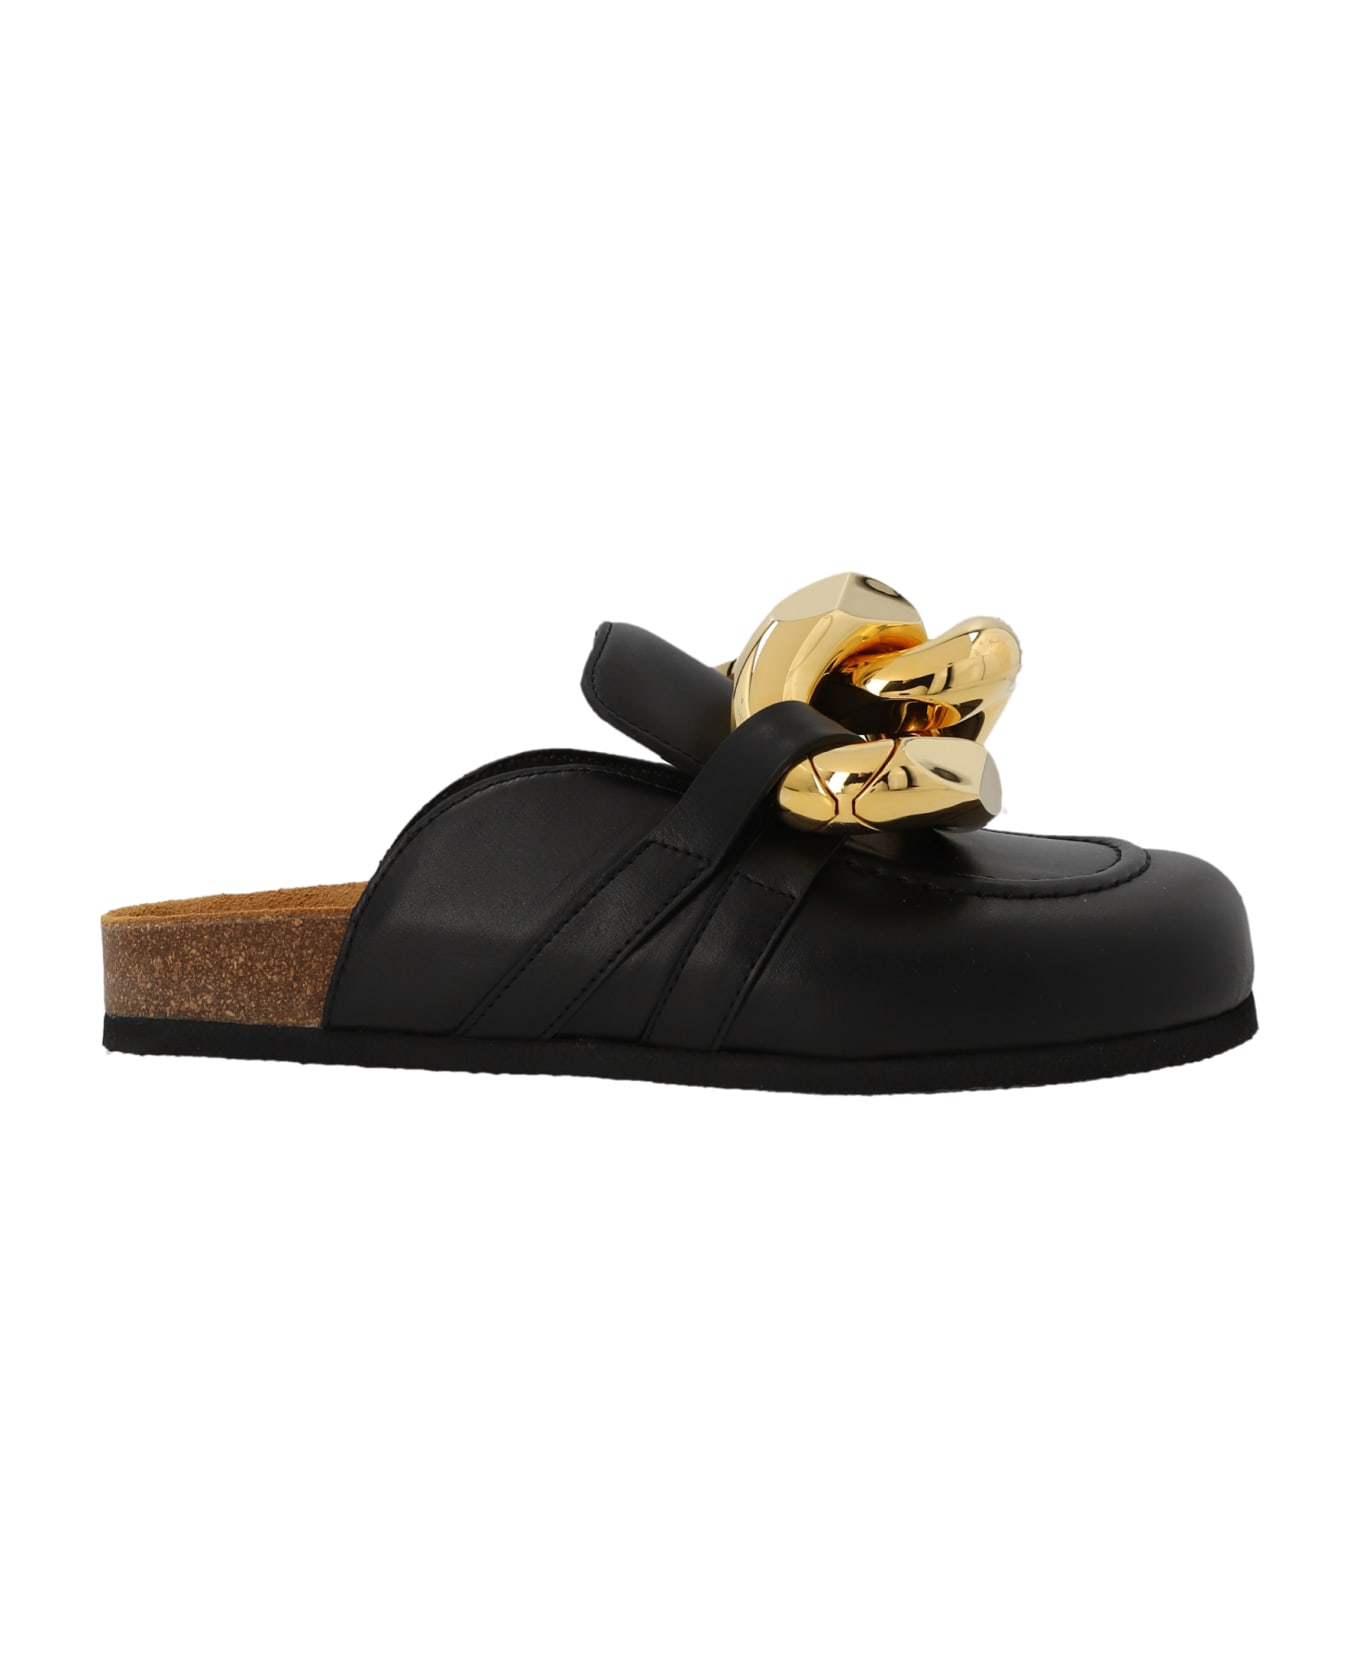 J.W. Anderson 'chain Loafer' Mules - Black  